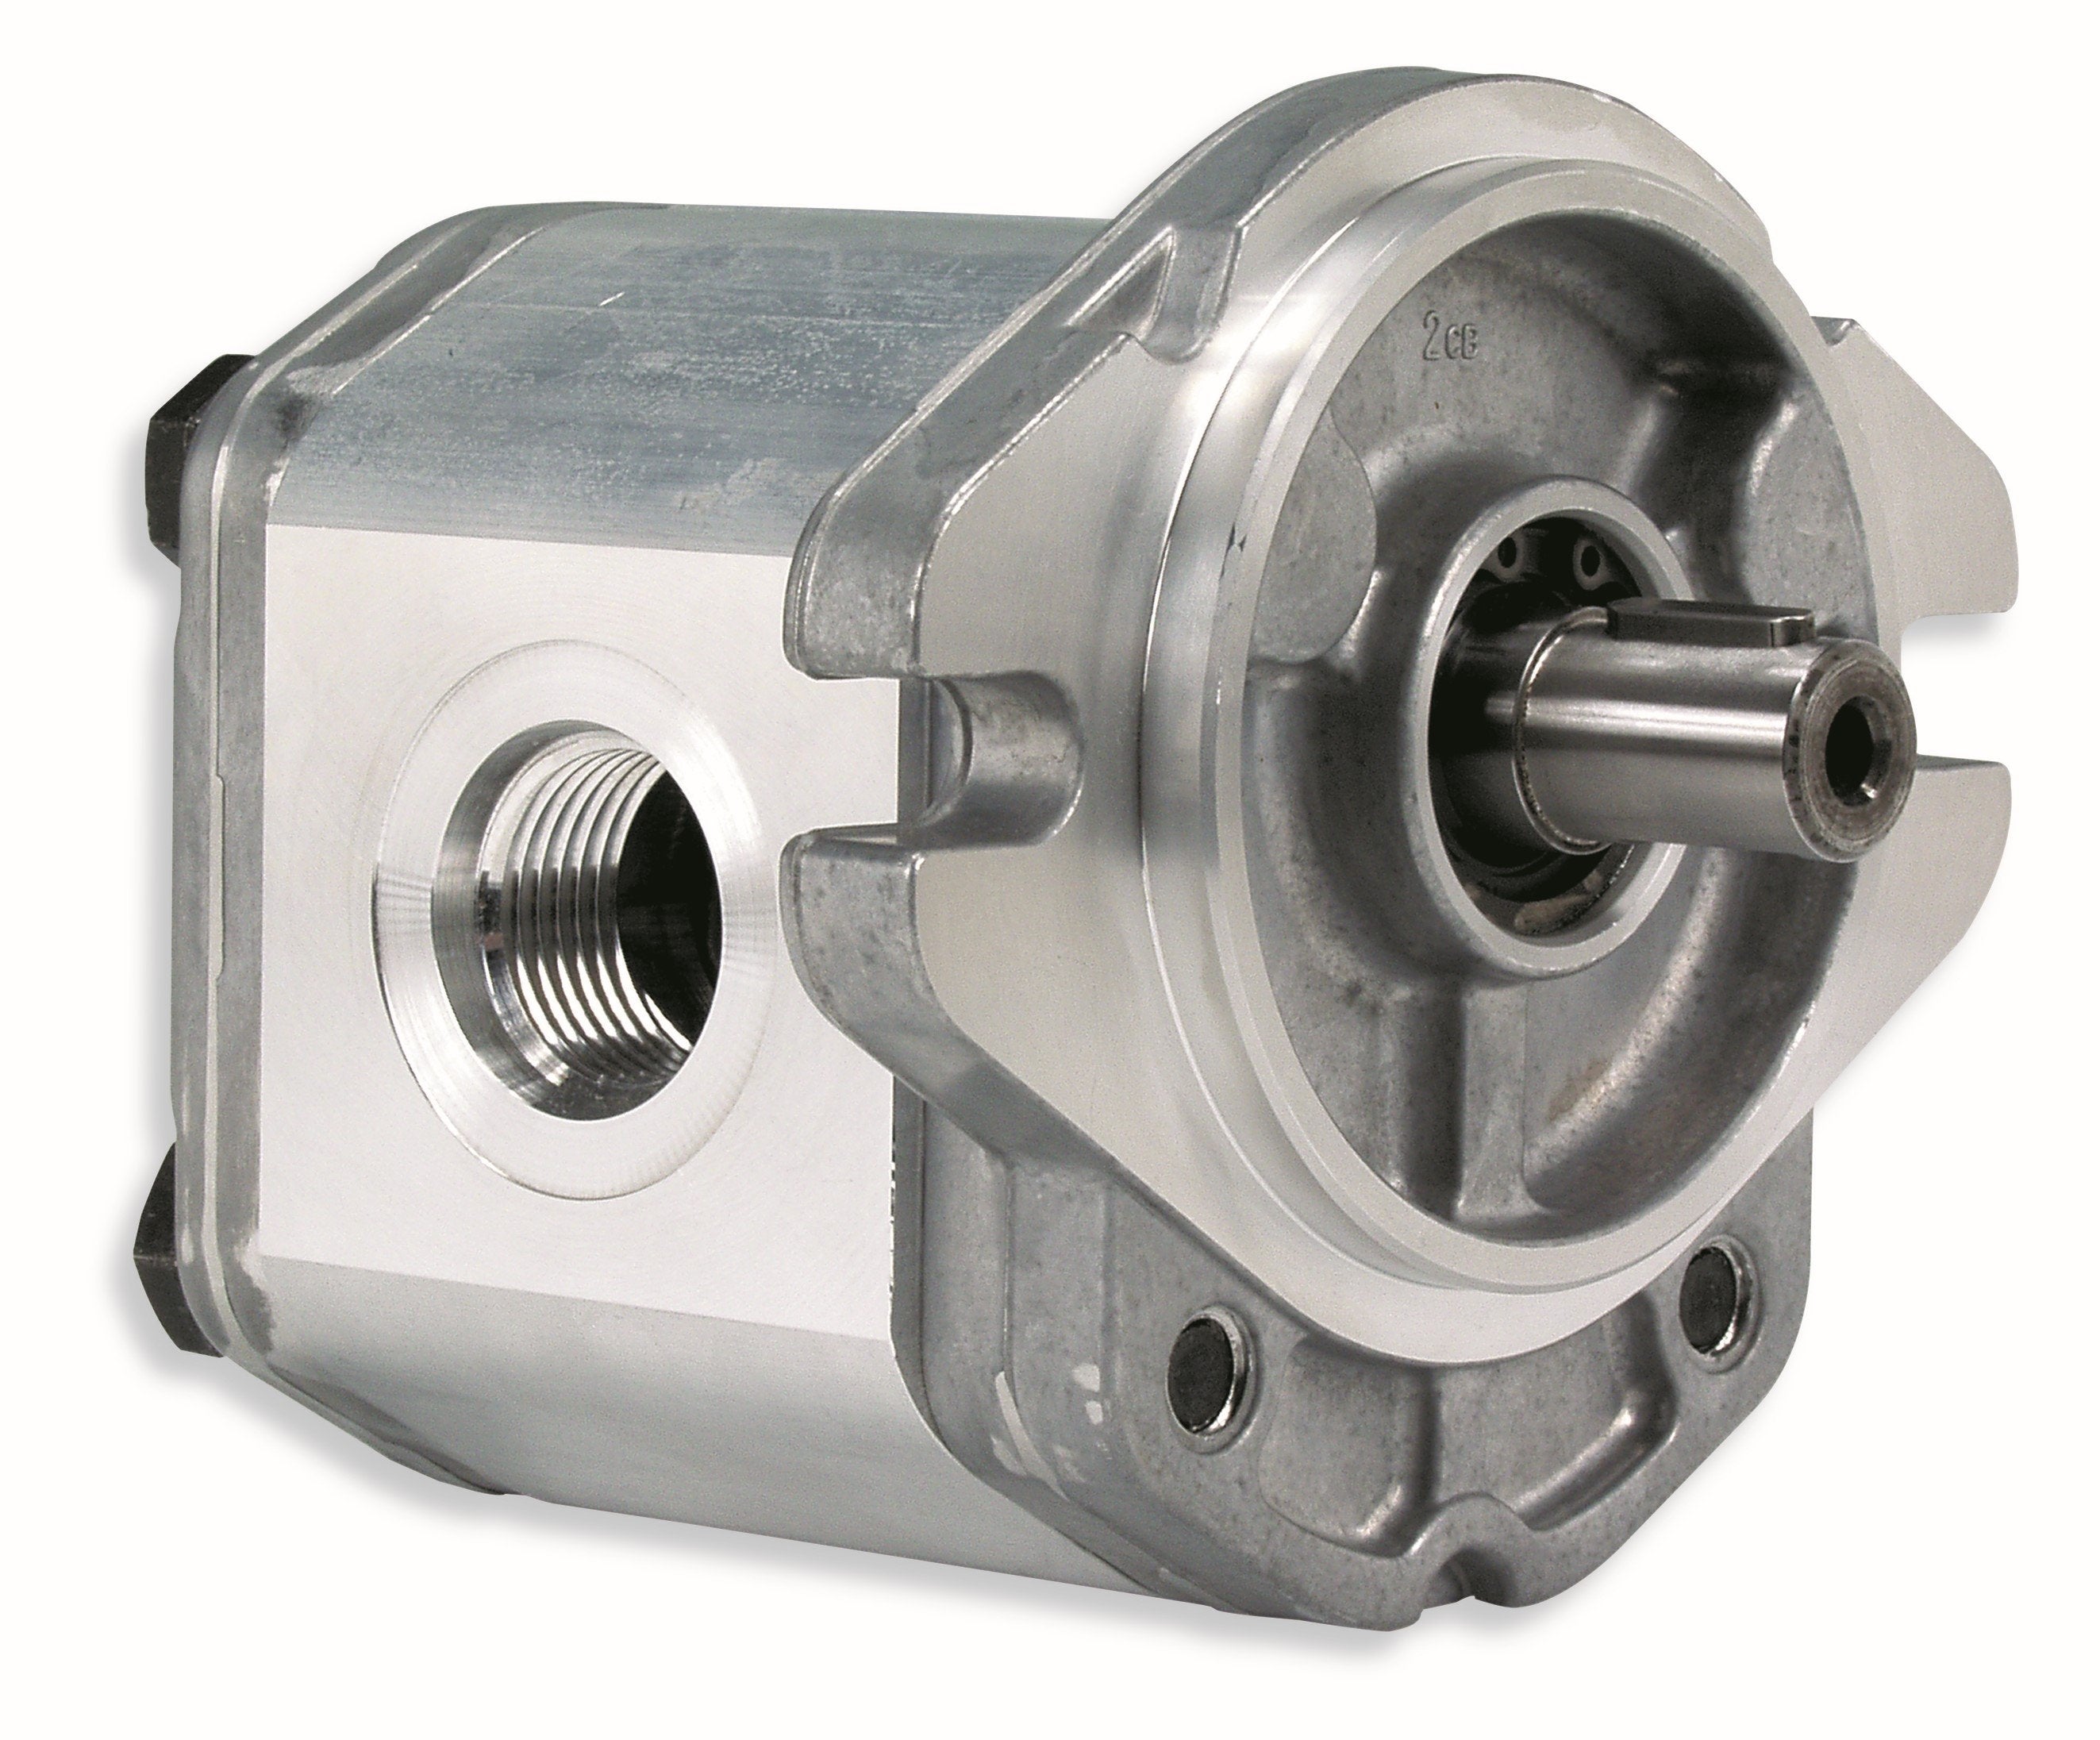 GHM2A-R-10-S1-E2 : Marzocchi Gear Motor, Bidirectional, 7cc, 4060psi rated, 4000RPM, 0.75 (3/4") #12 SAE ports, 9T 16/32DP Splined Shaft